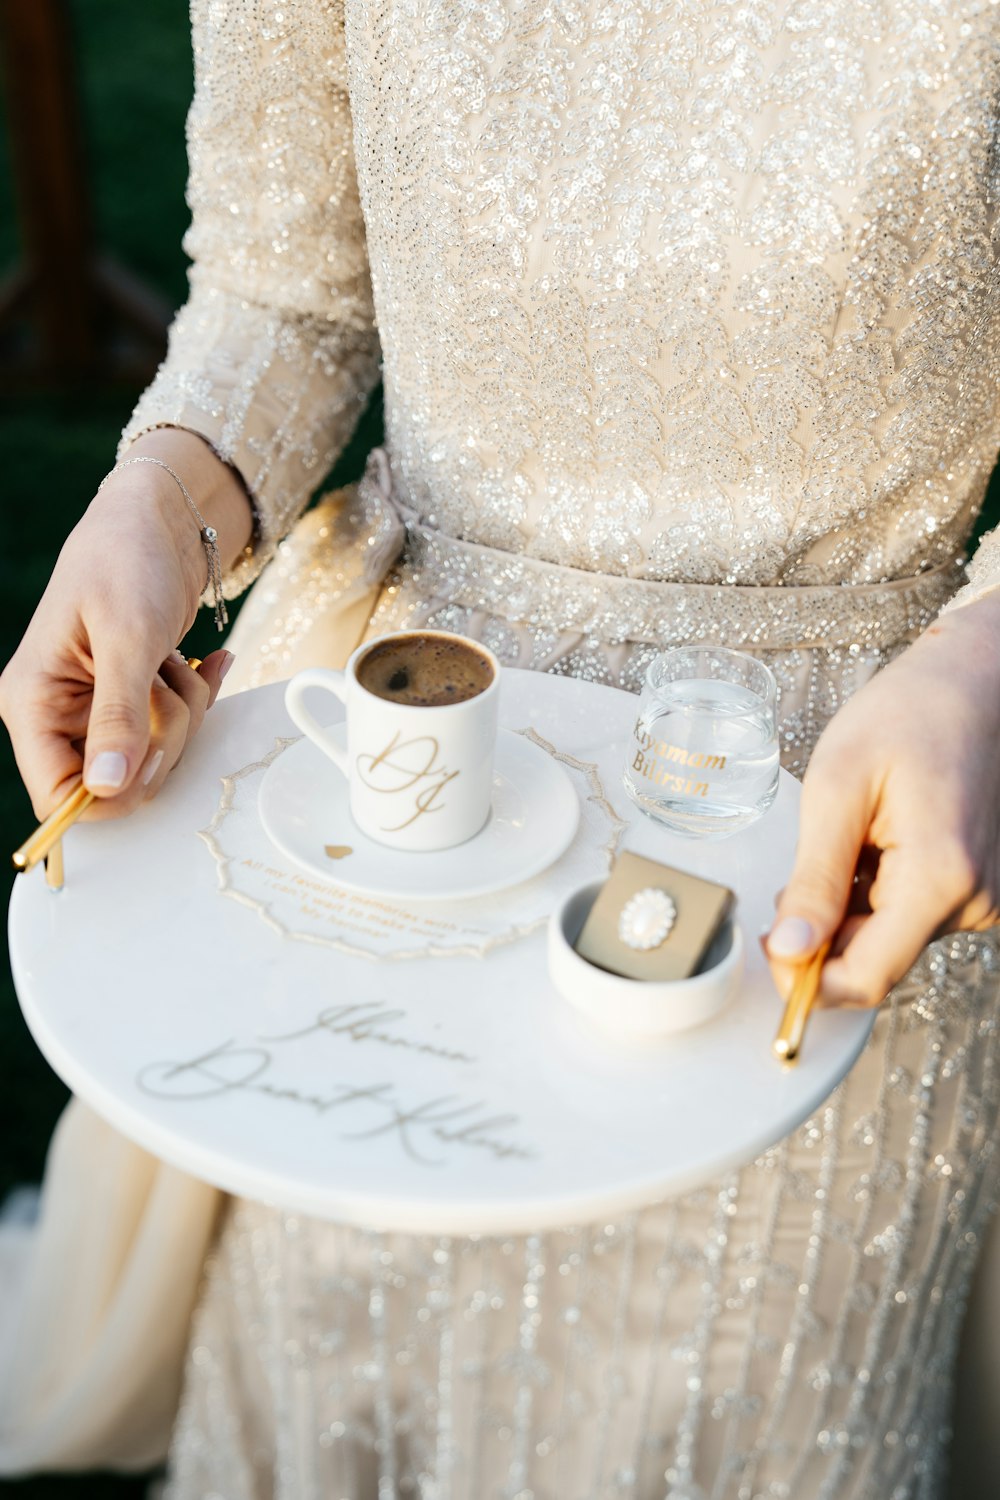 a woman holding a tray with a cup of coffee on it